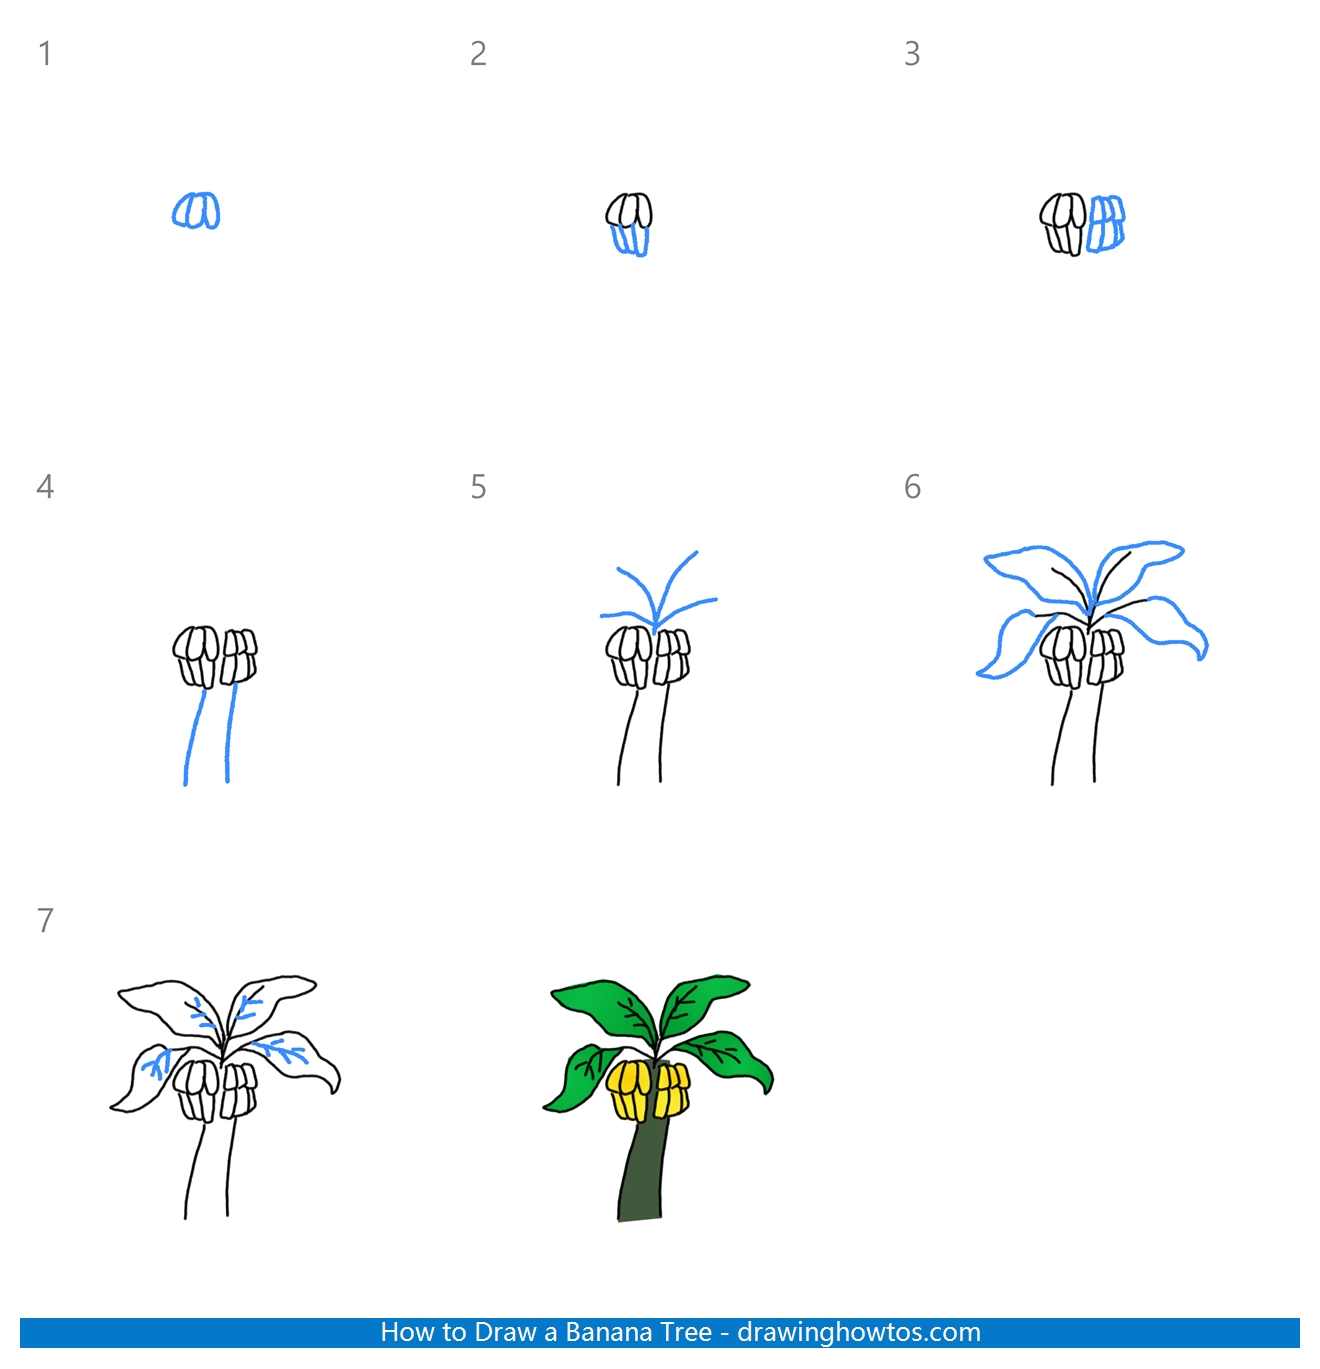 How to Draw a Banana Tree Step by Step